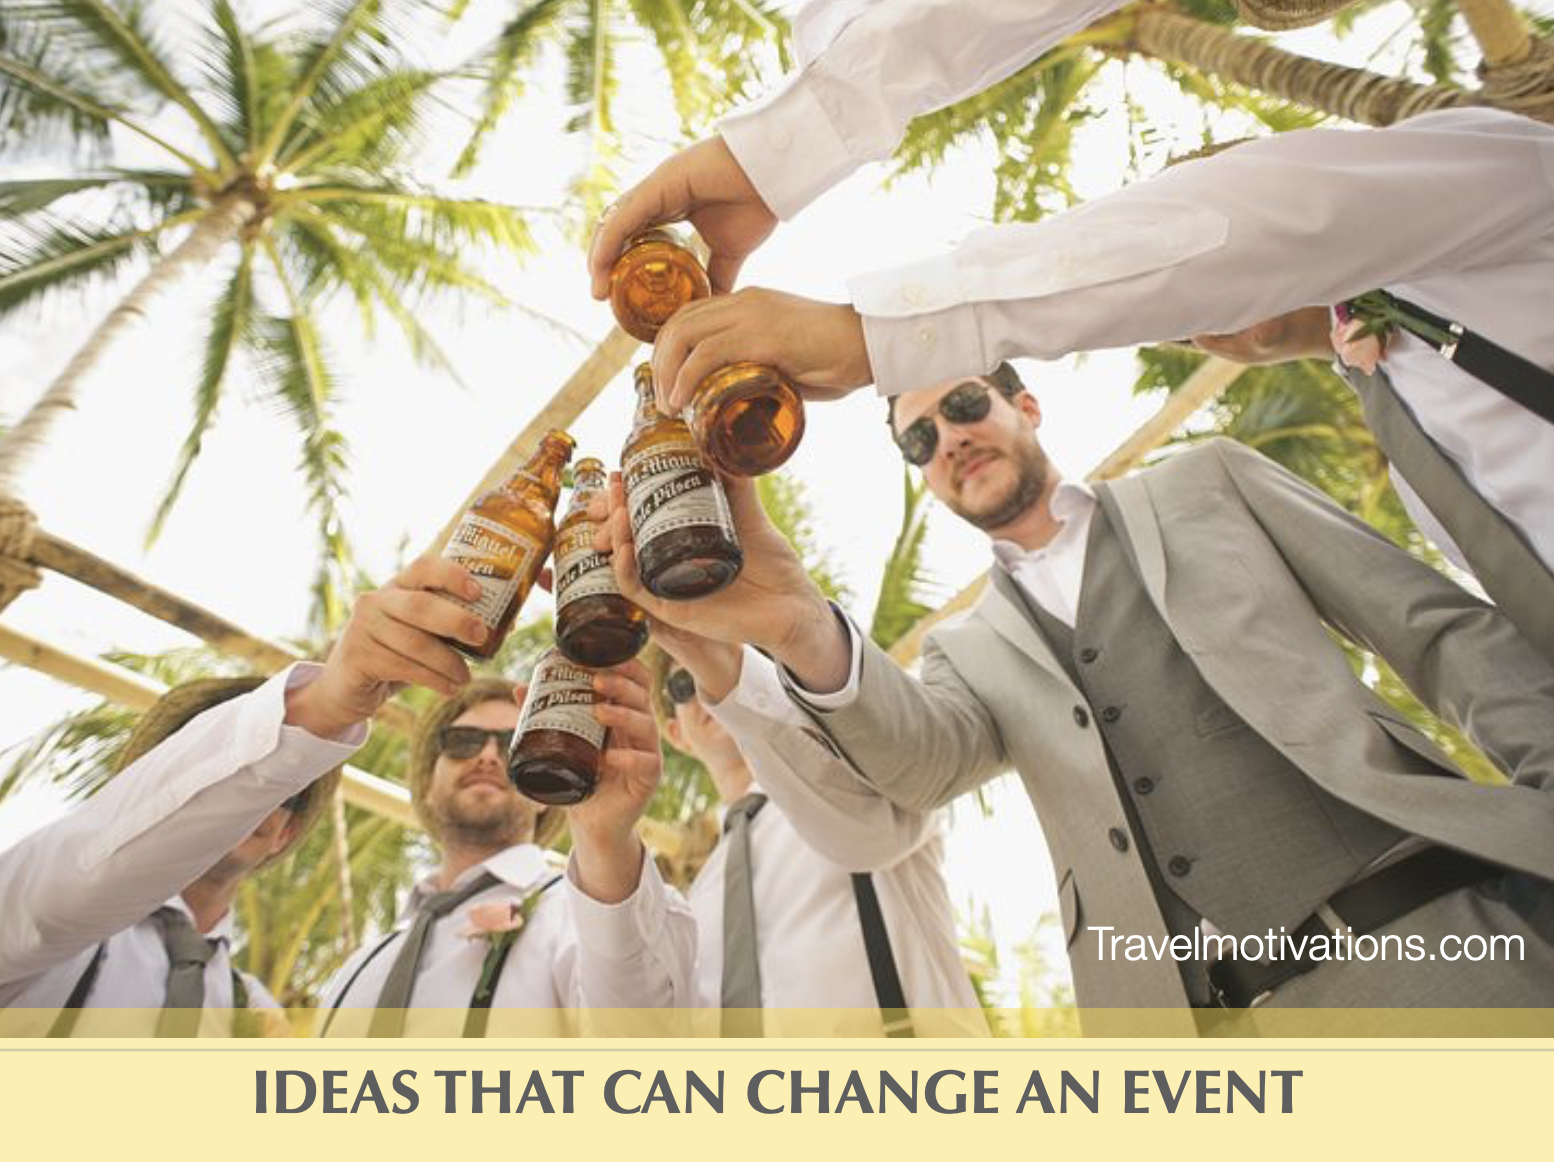 Ideas that can change an event